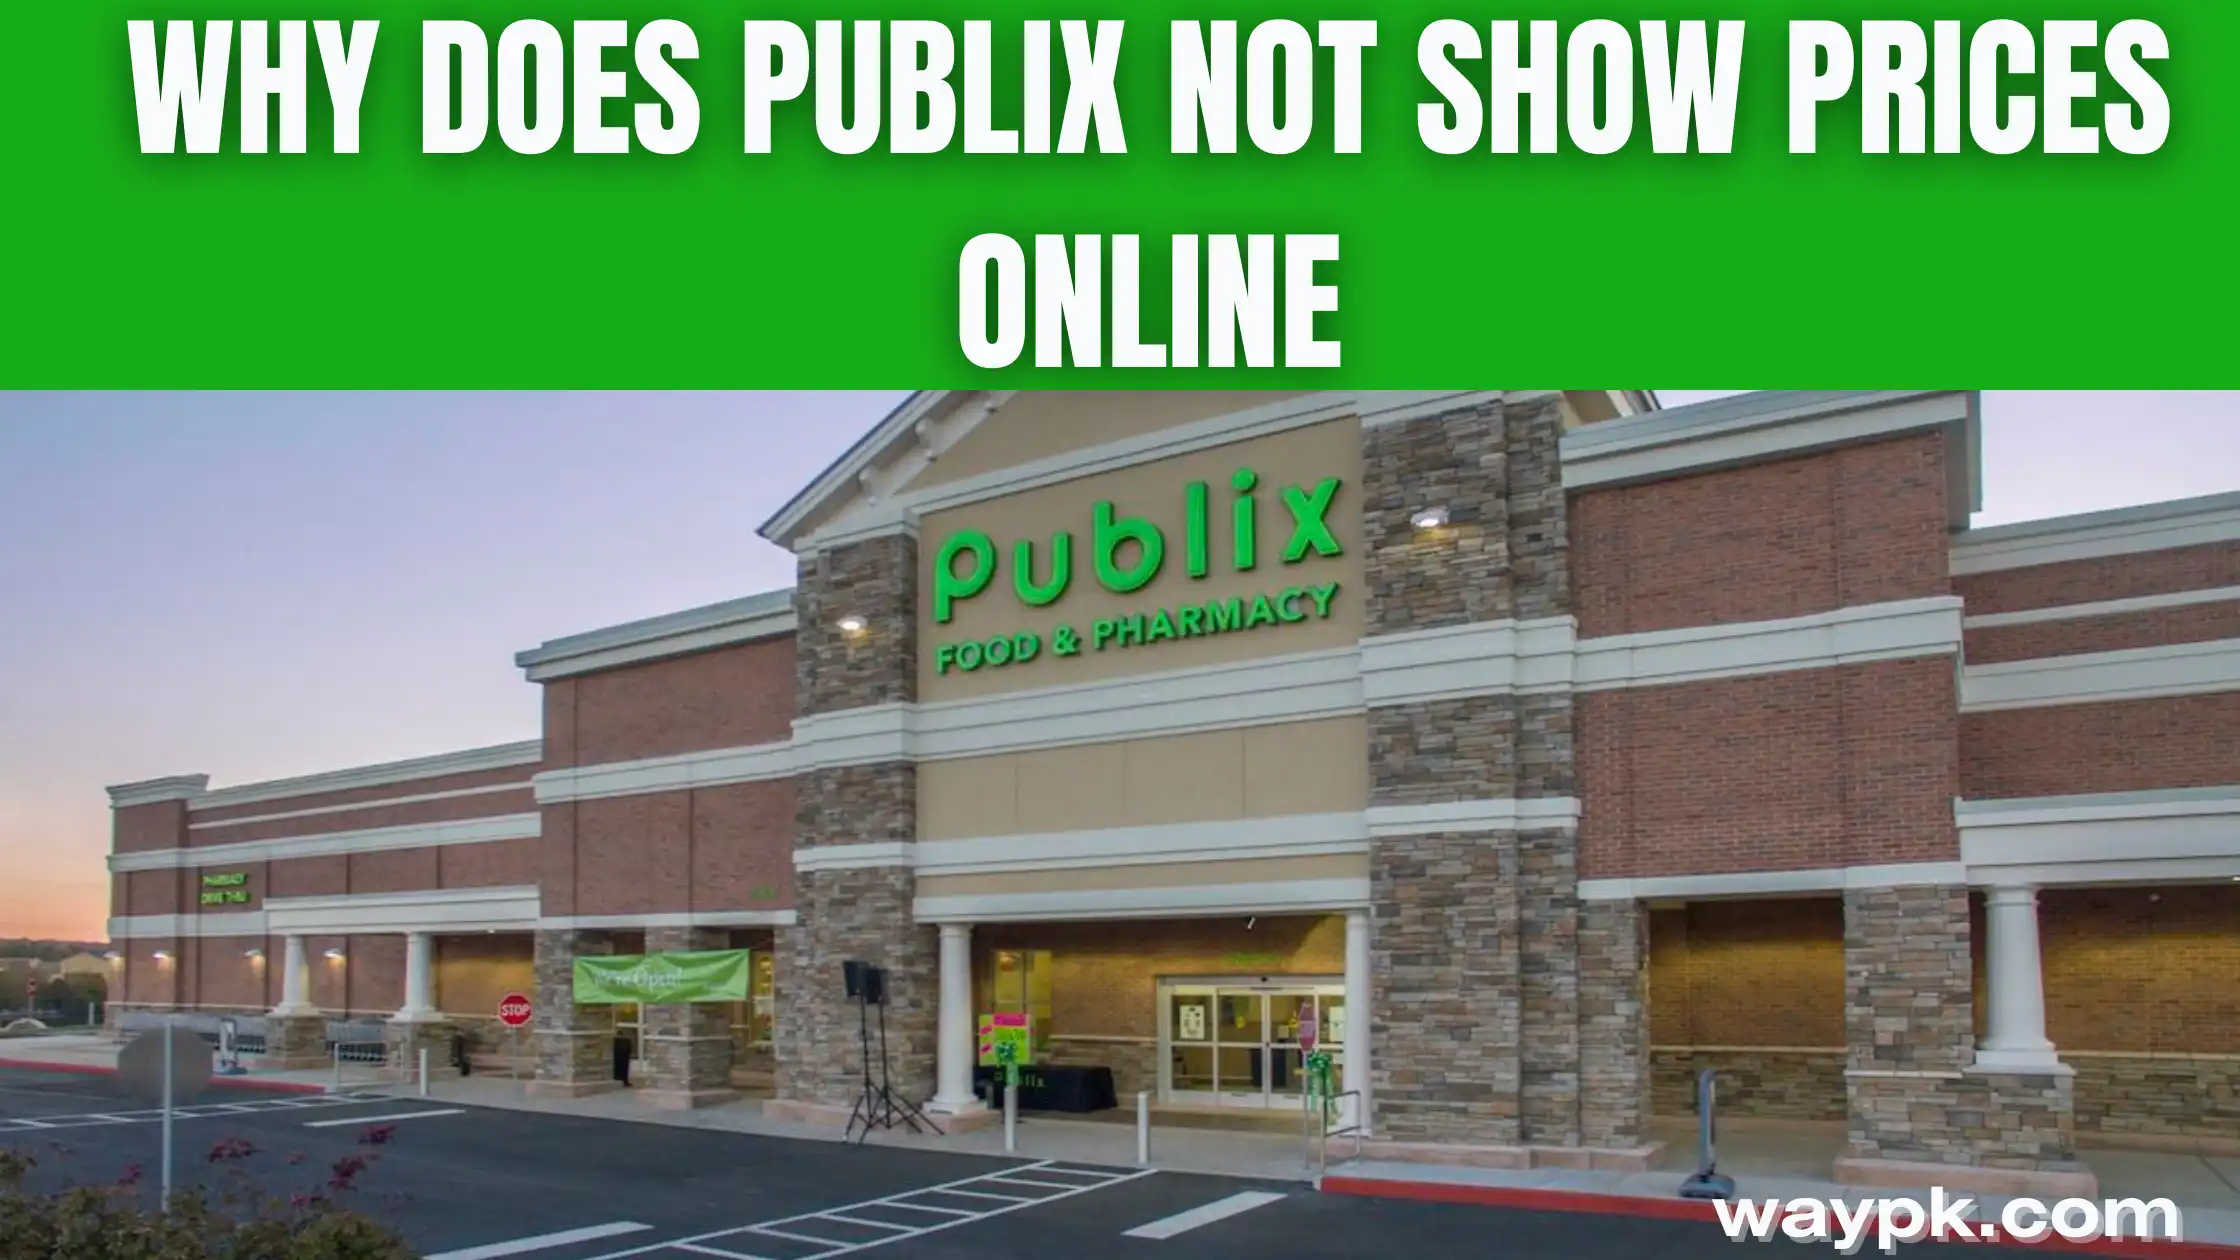 Why Does Publix not Show Prices online?